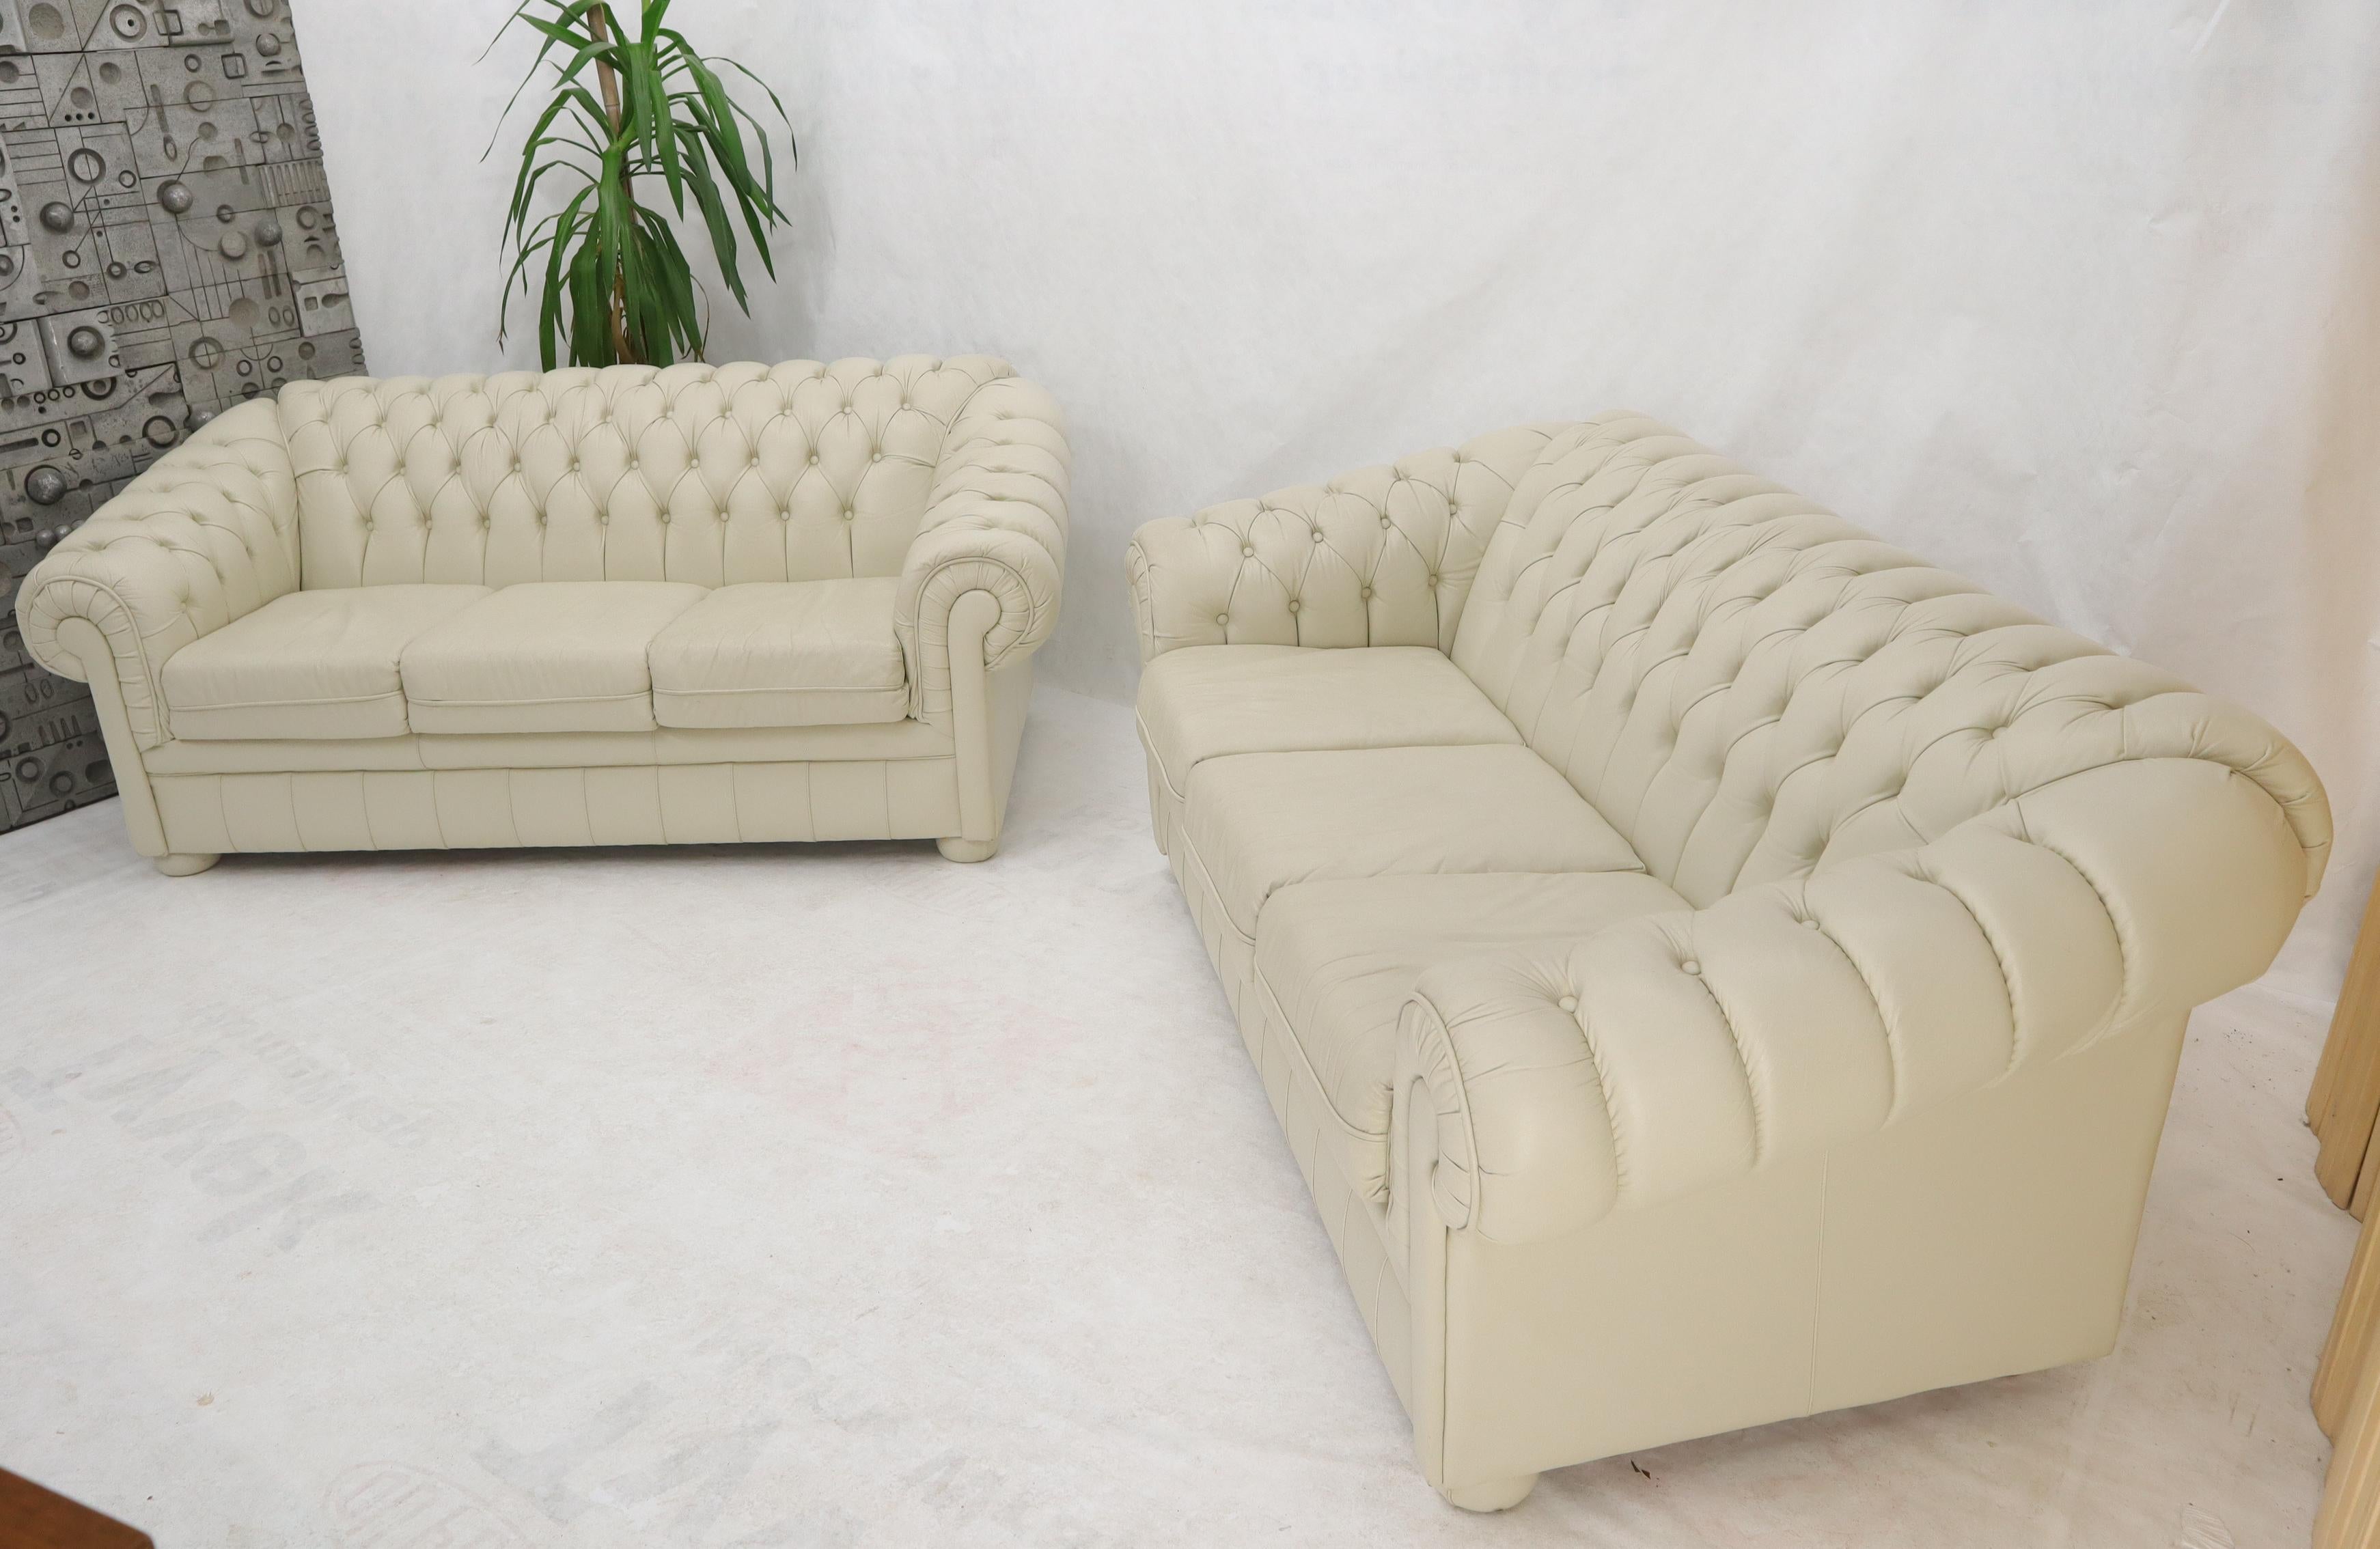 Mid-Century Modern Pair of Off-White Leather Upholstery Tufted Chesterfield Sofas Couches